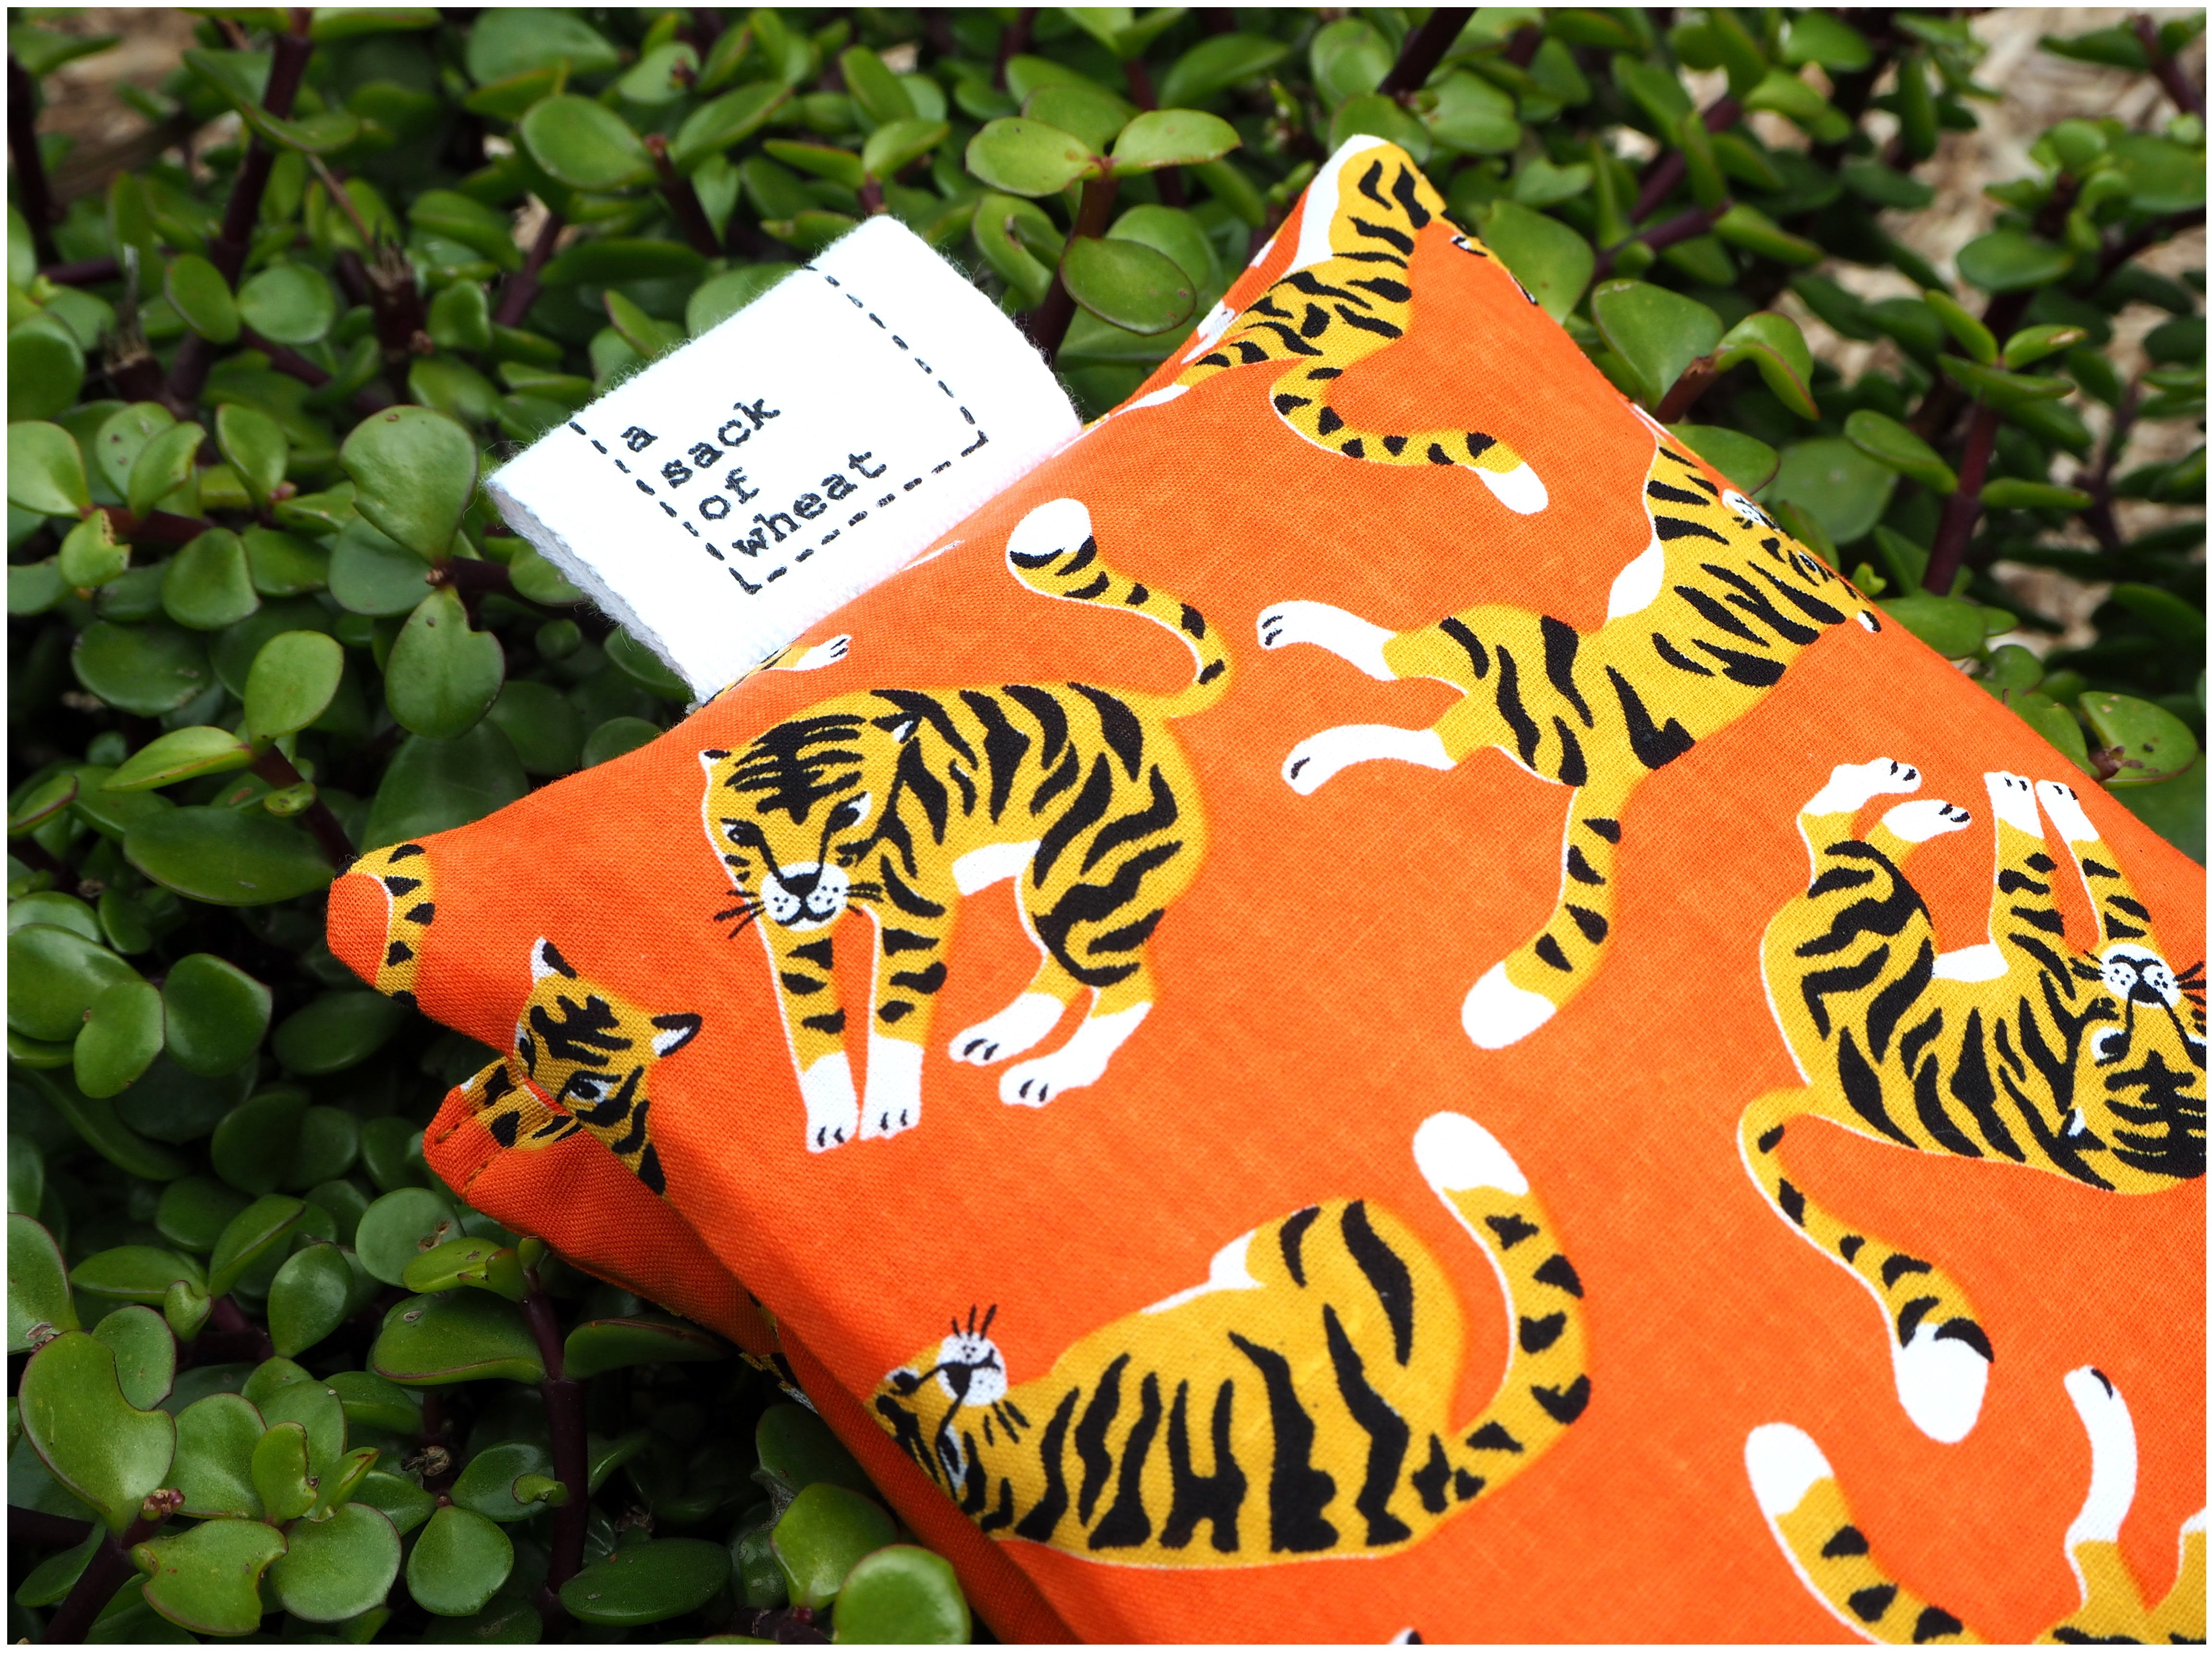 Folded view of A Sack Of Wheat, featuring  colorful tigers on bright orange fabric. 100% cotton fabric.